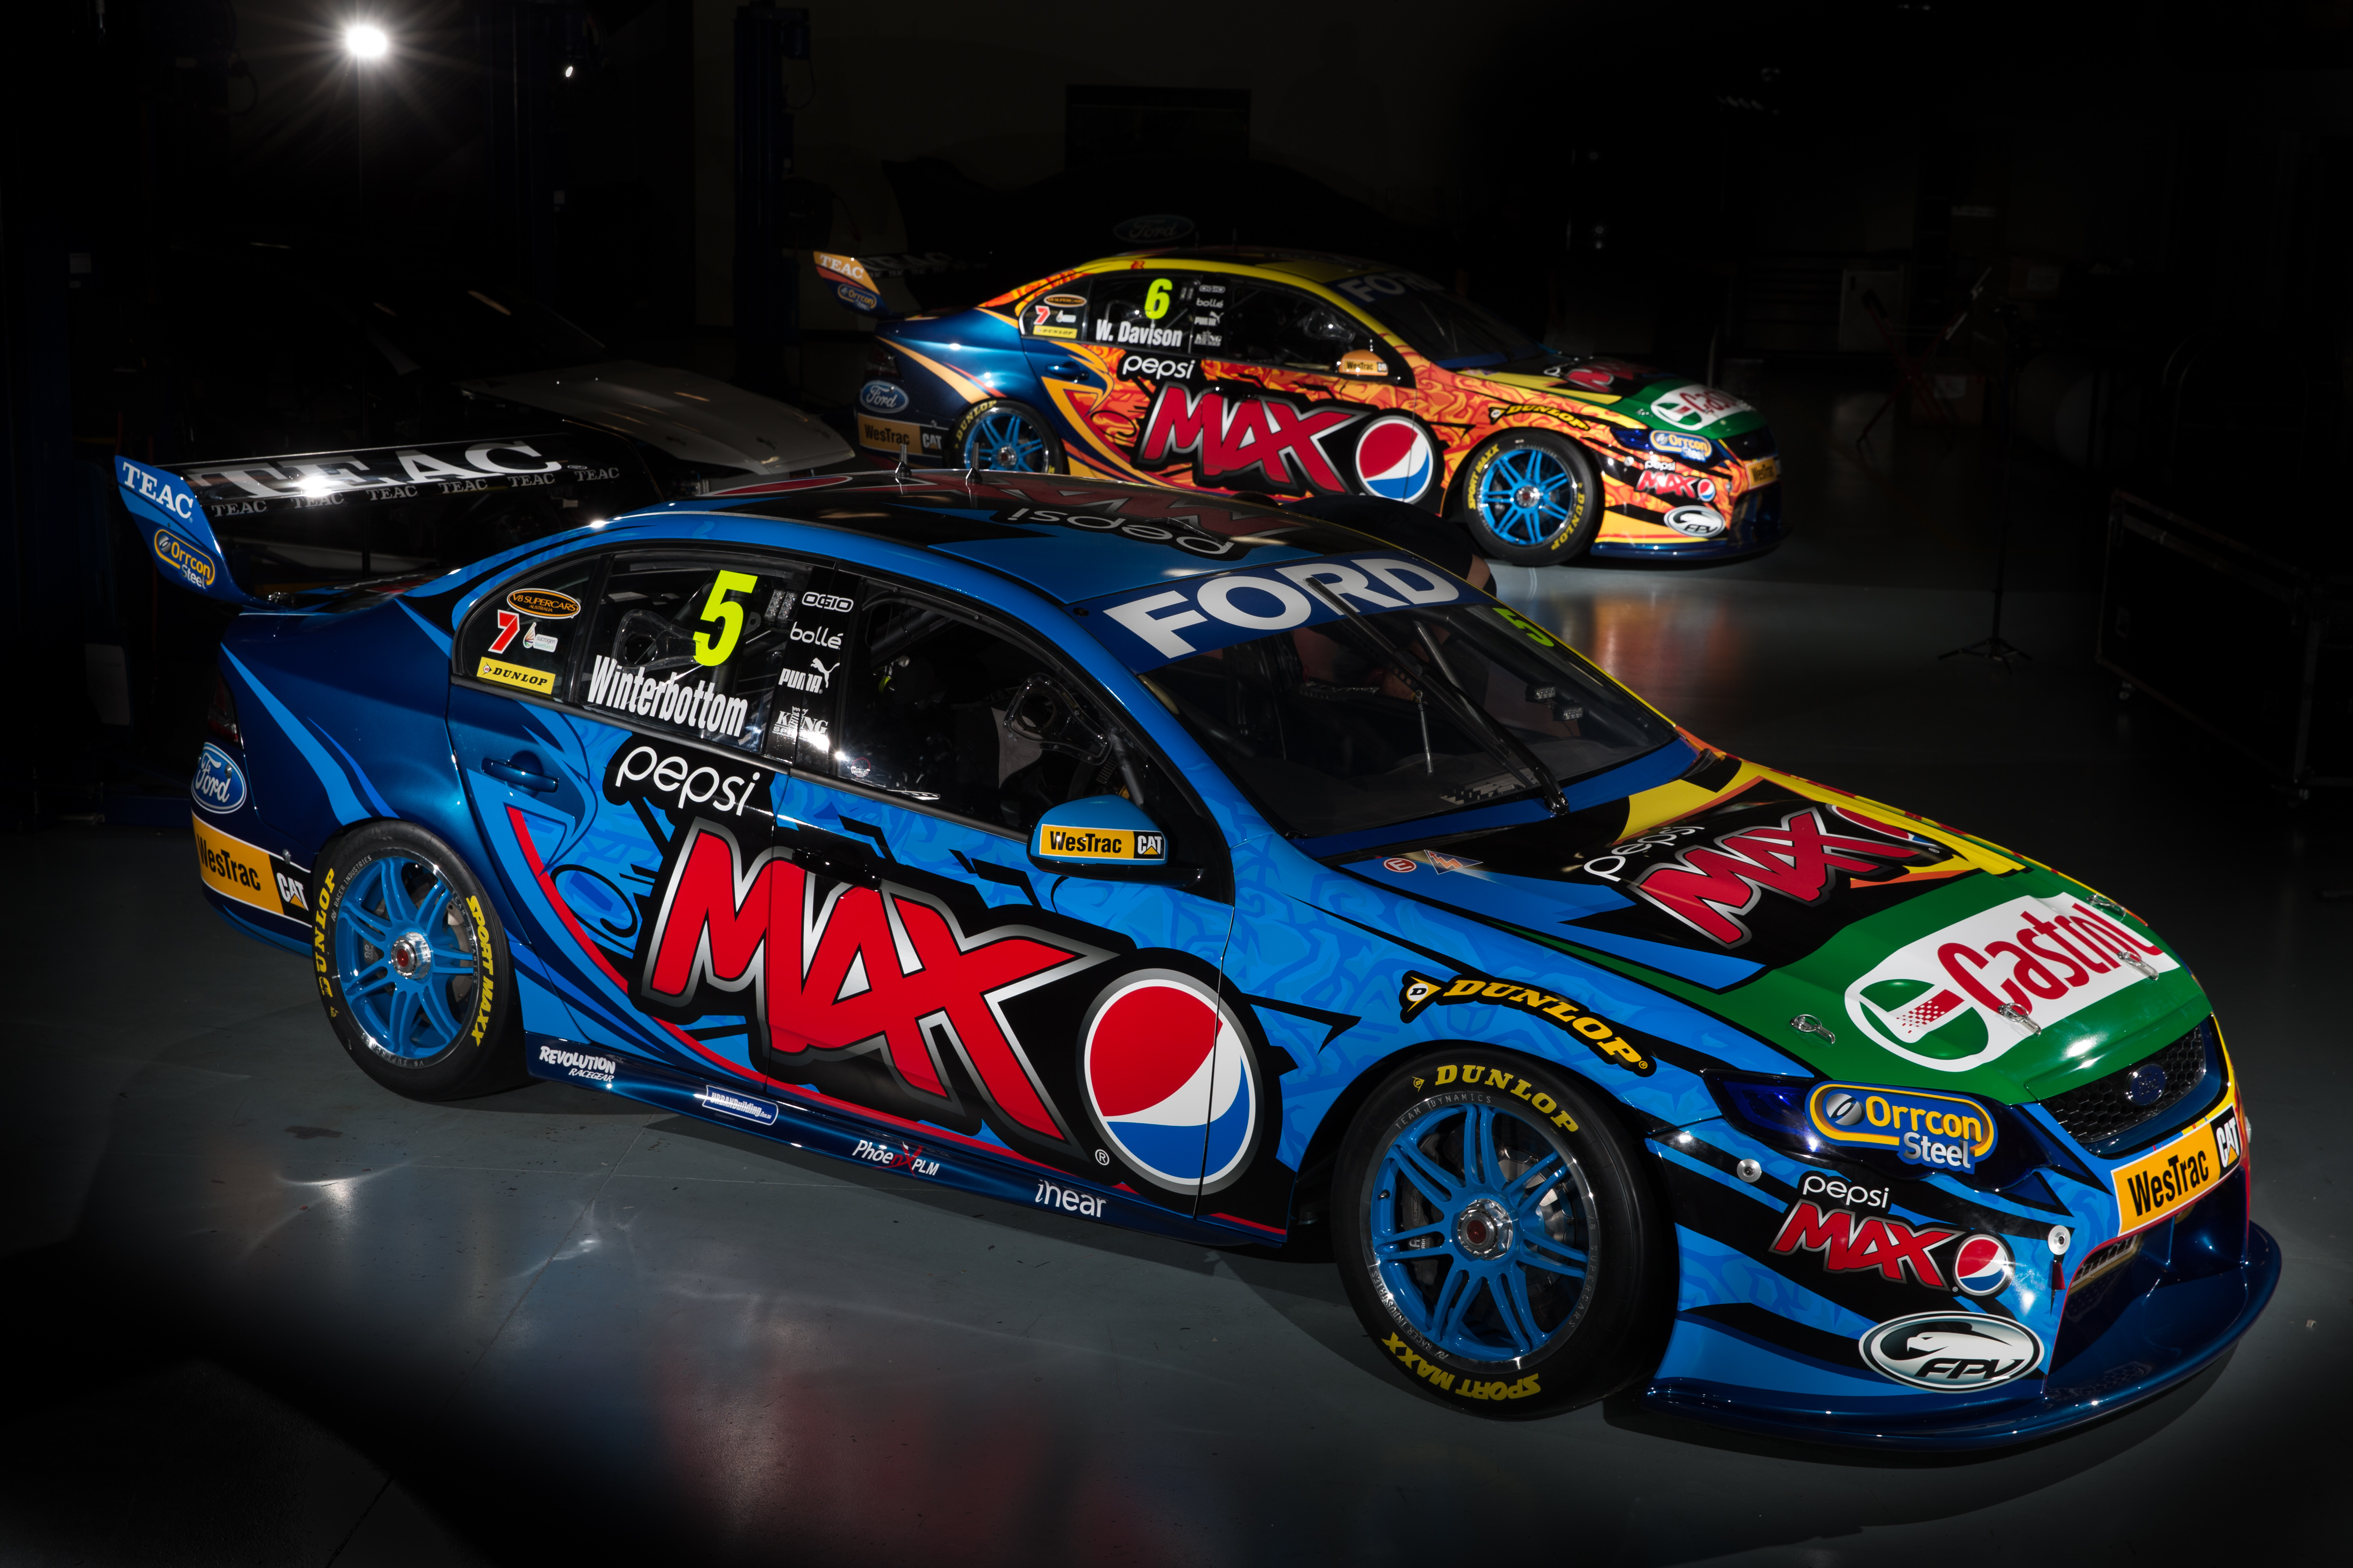 aussie, V8, Supercars, Race, Racing, V 8, Ford Wallpaper